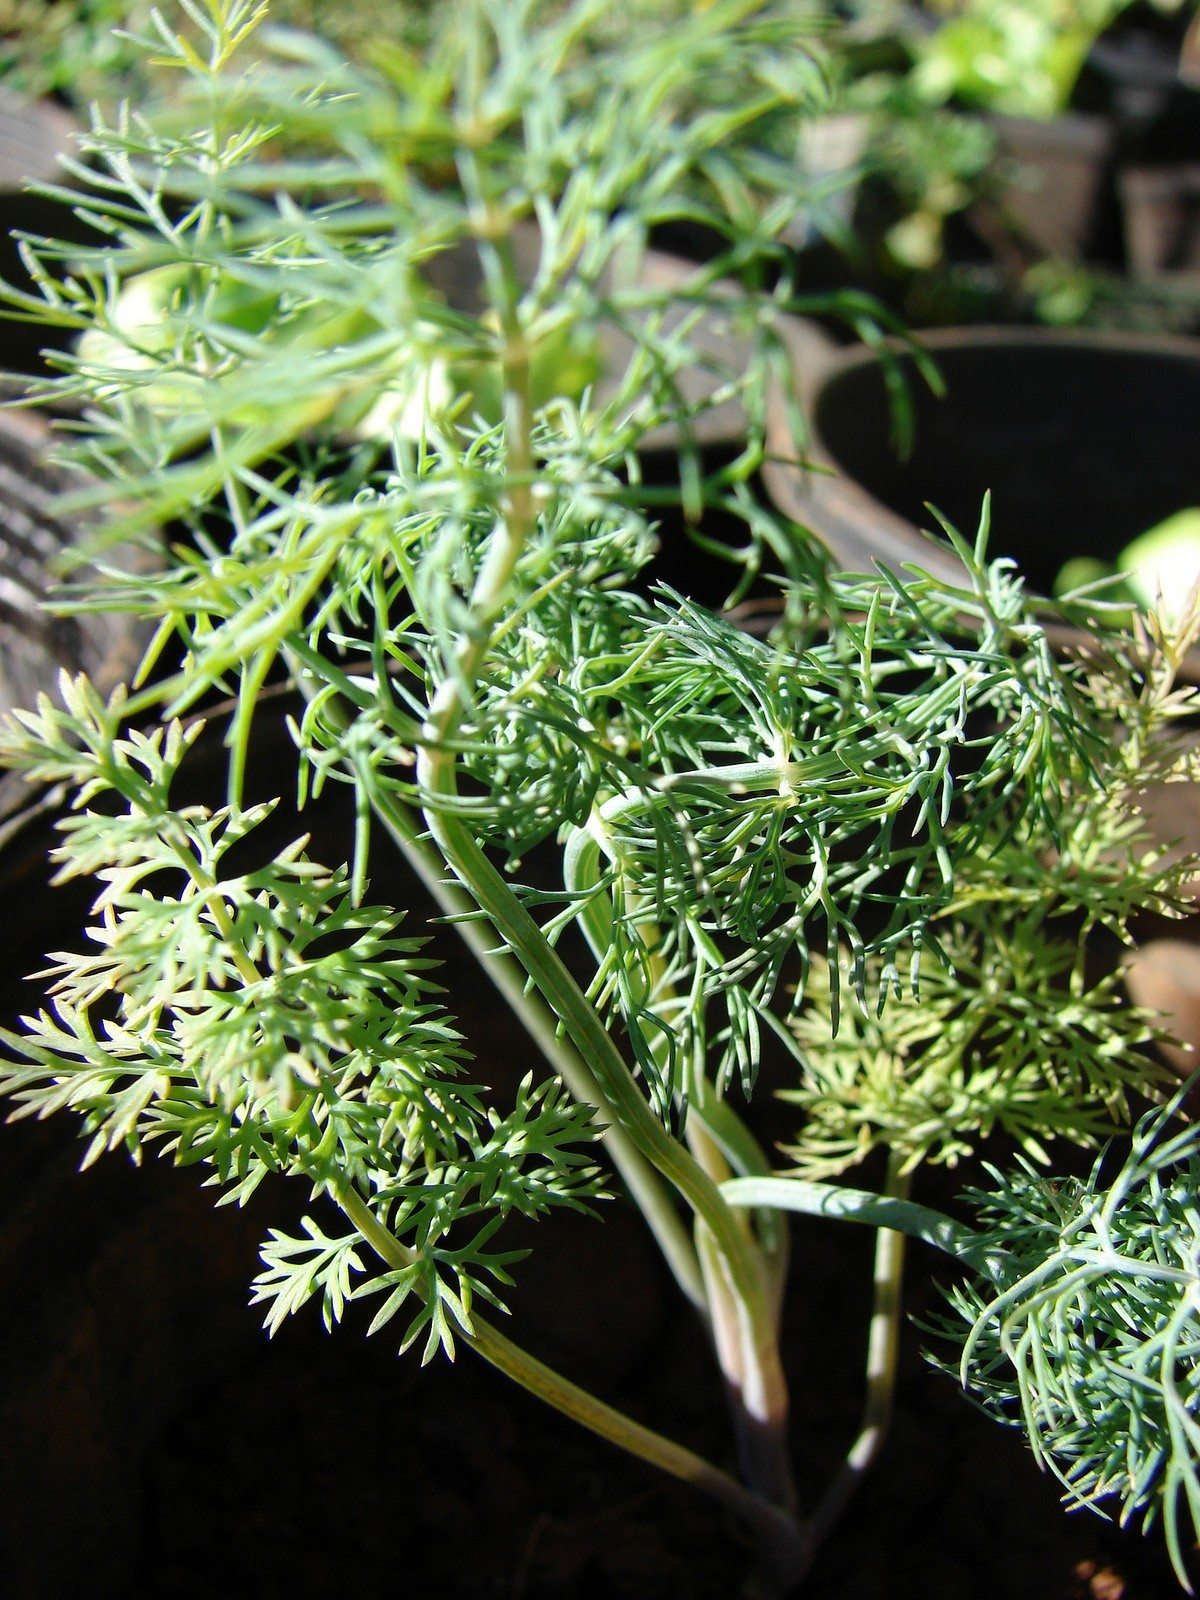 My Dill Plant Is Flowering ? Information About Flowering In Dill Plants